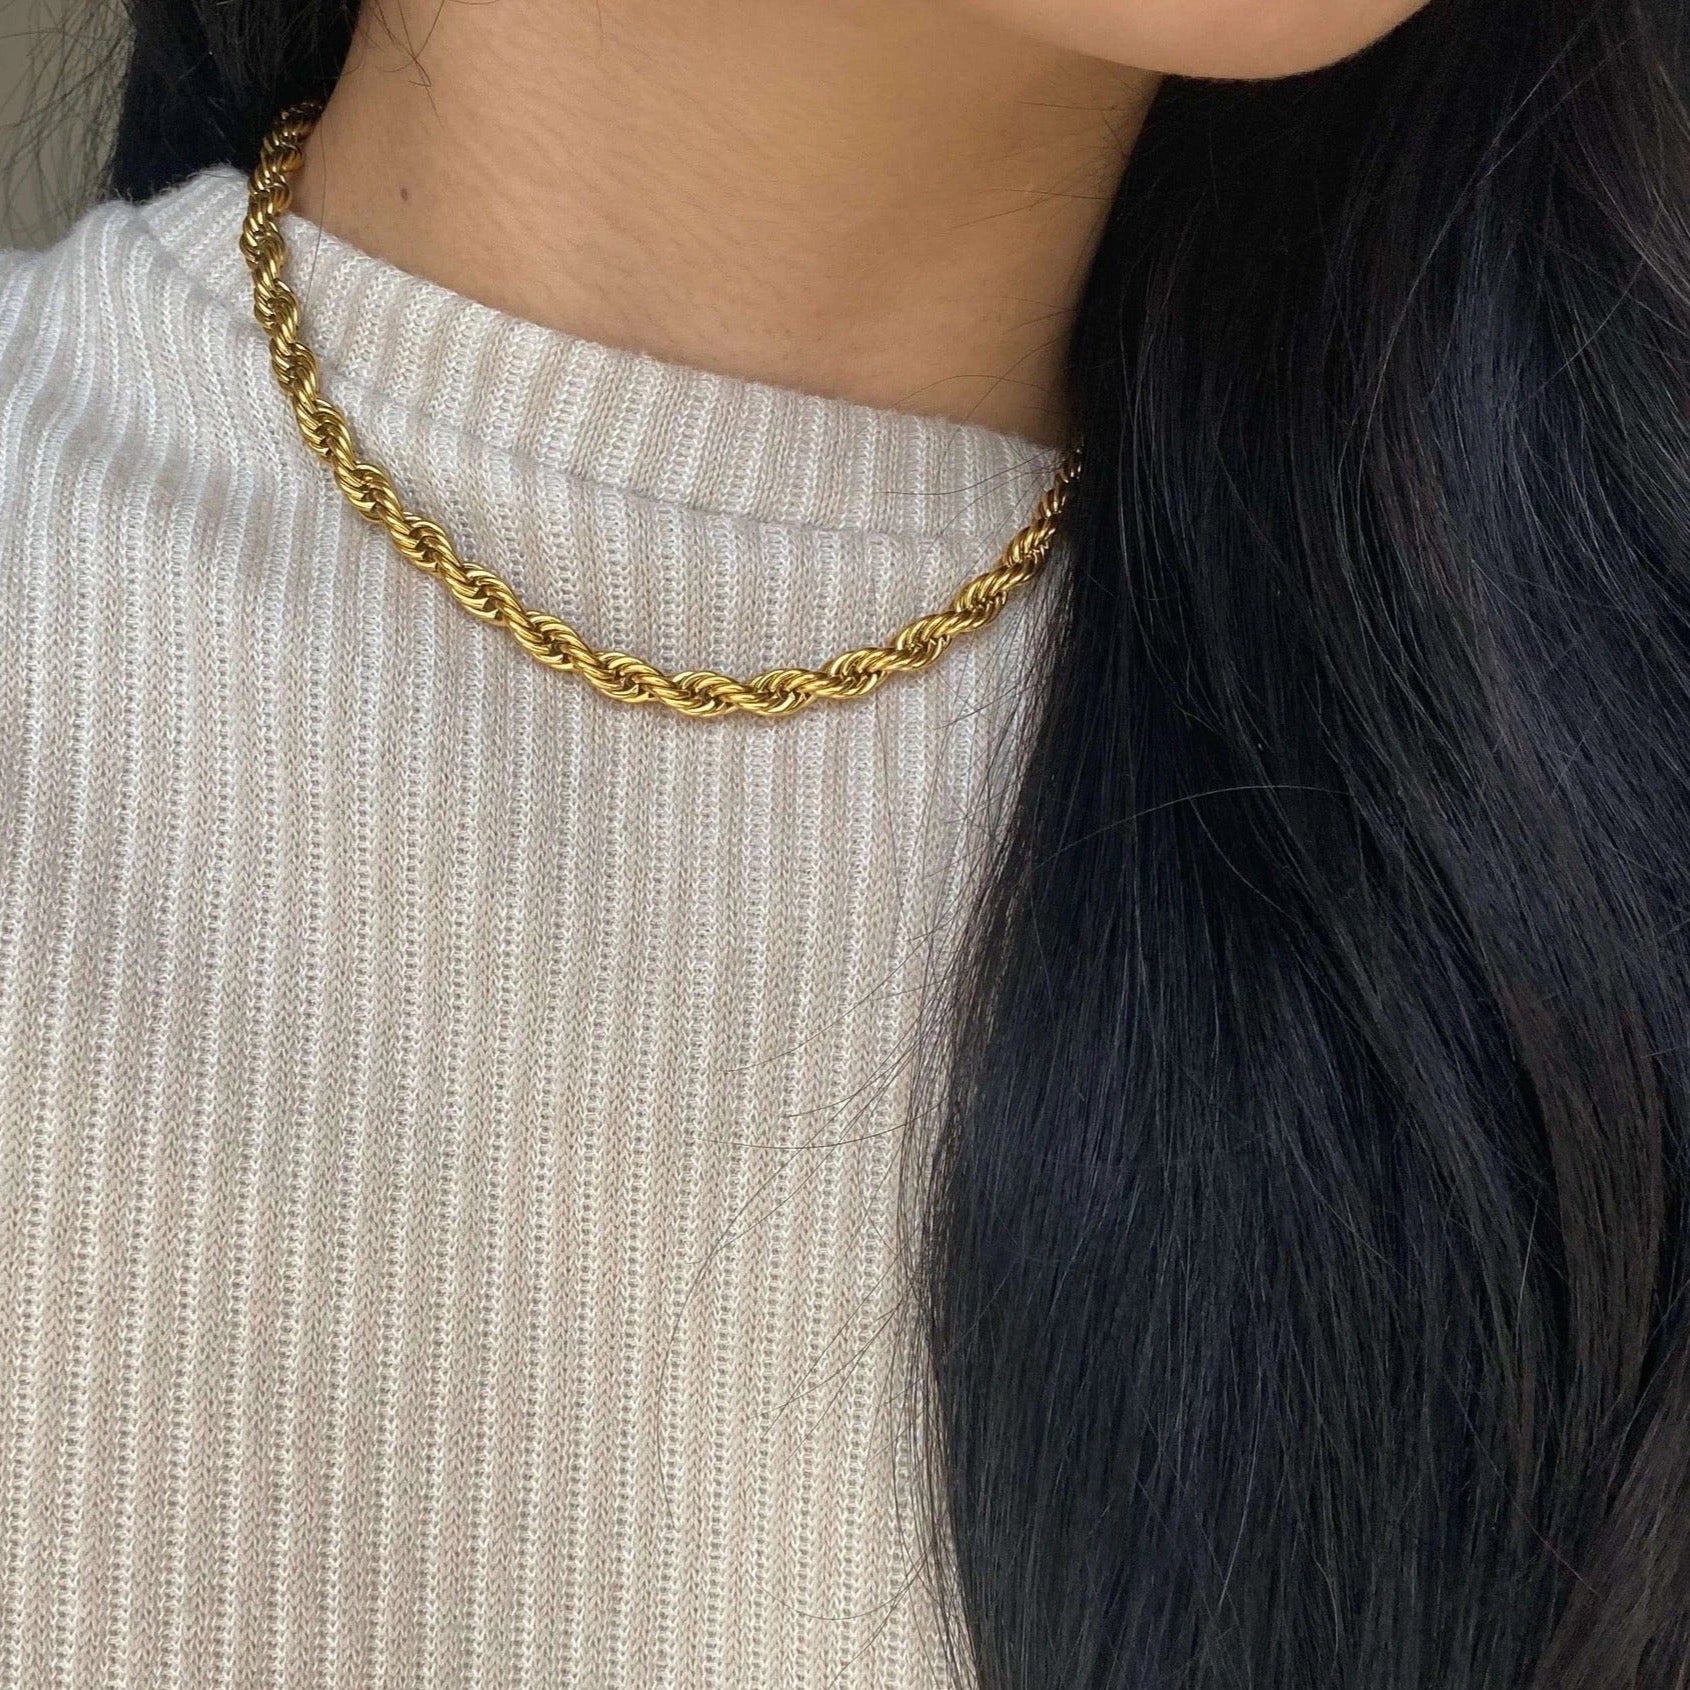 Girl with dark brow hair wearing a white sweater and a twisted gold chain necklace